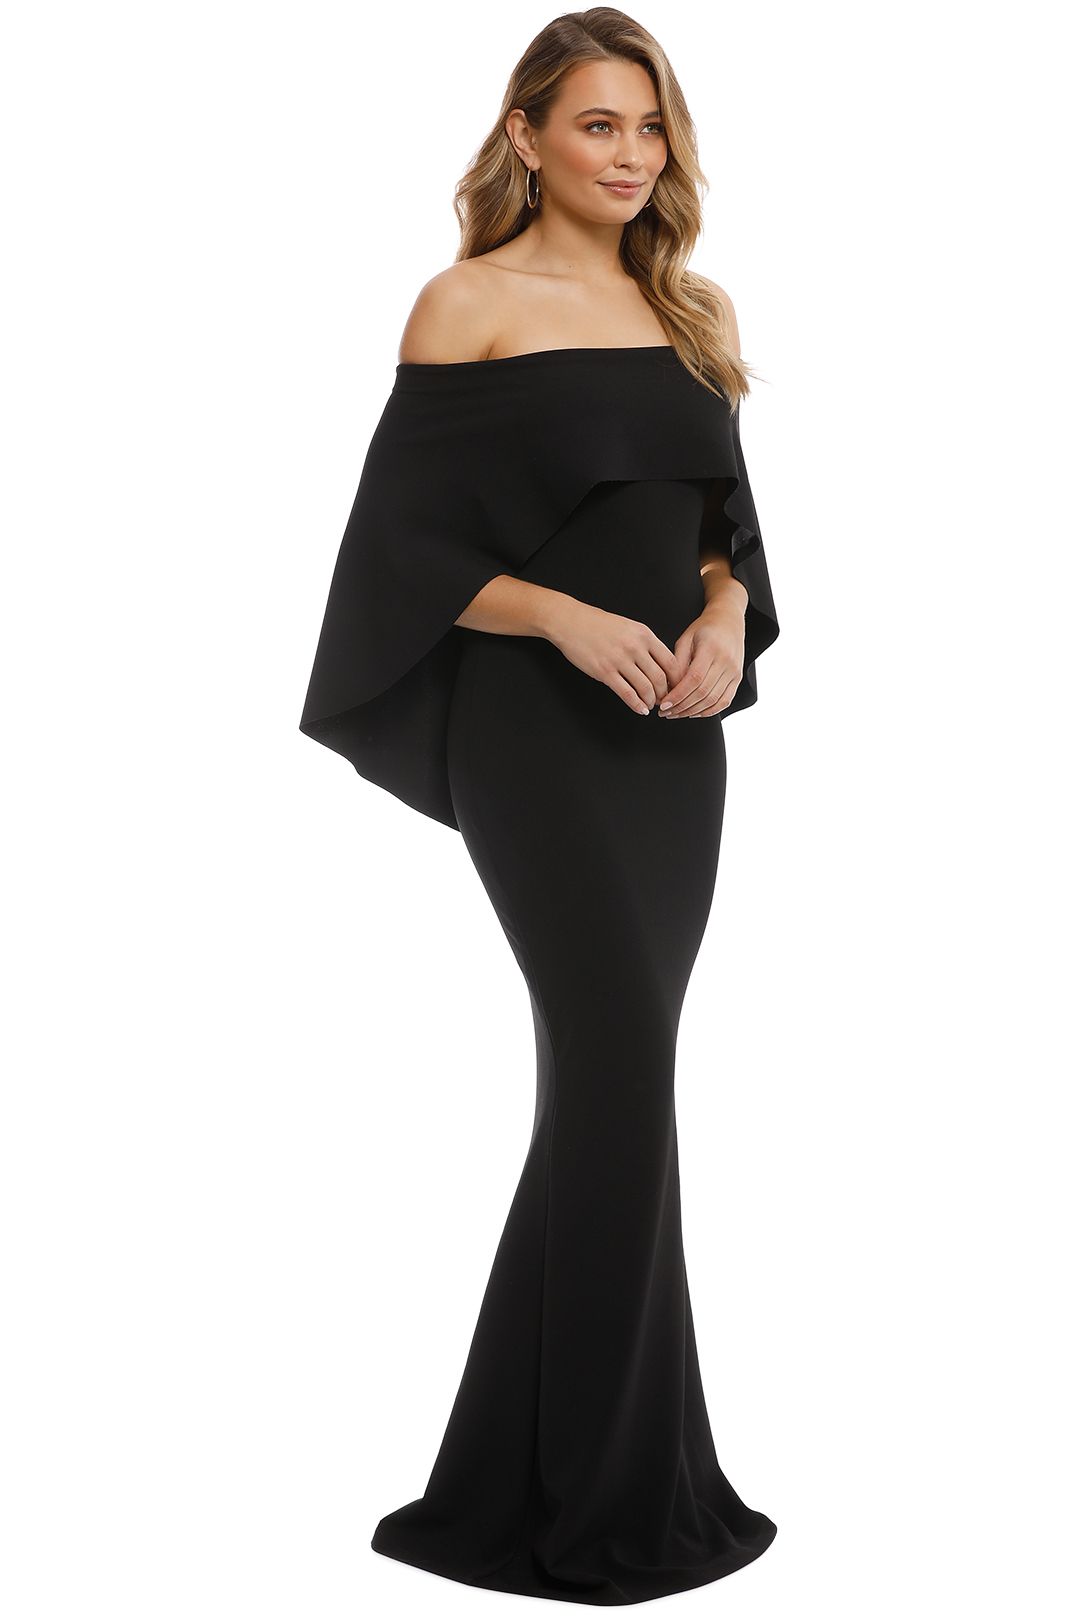 Composure Gown in Black by Pasduchas 